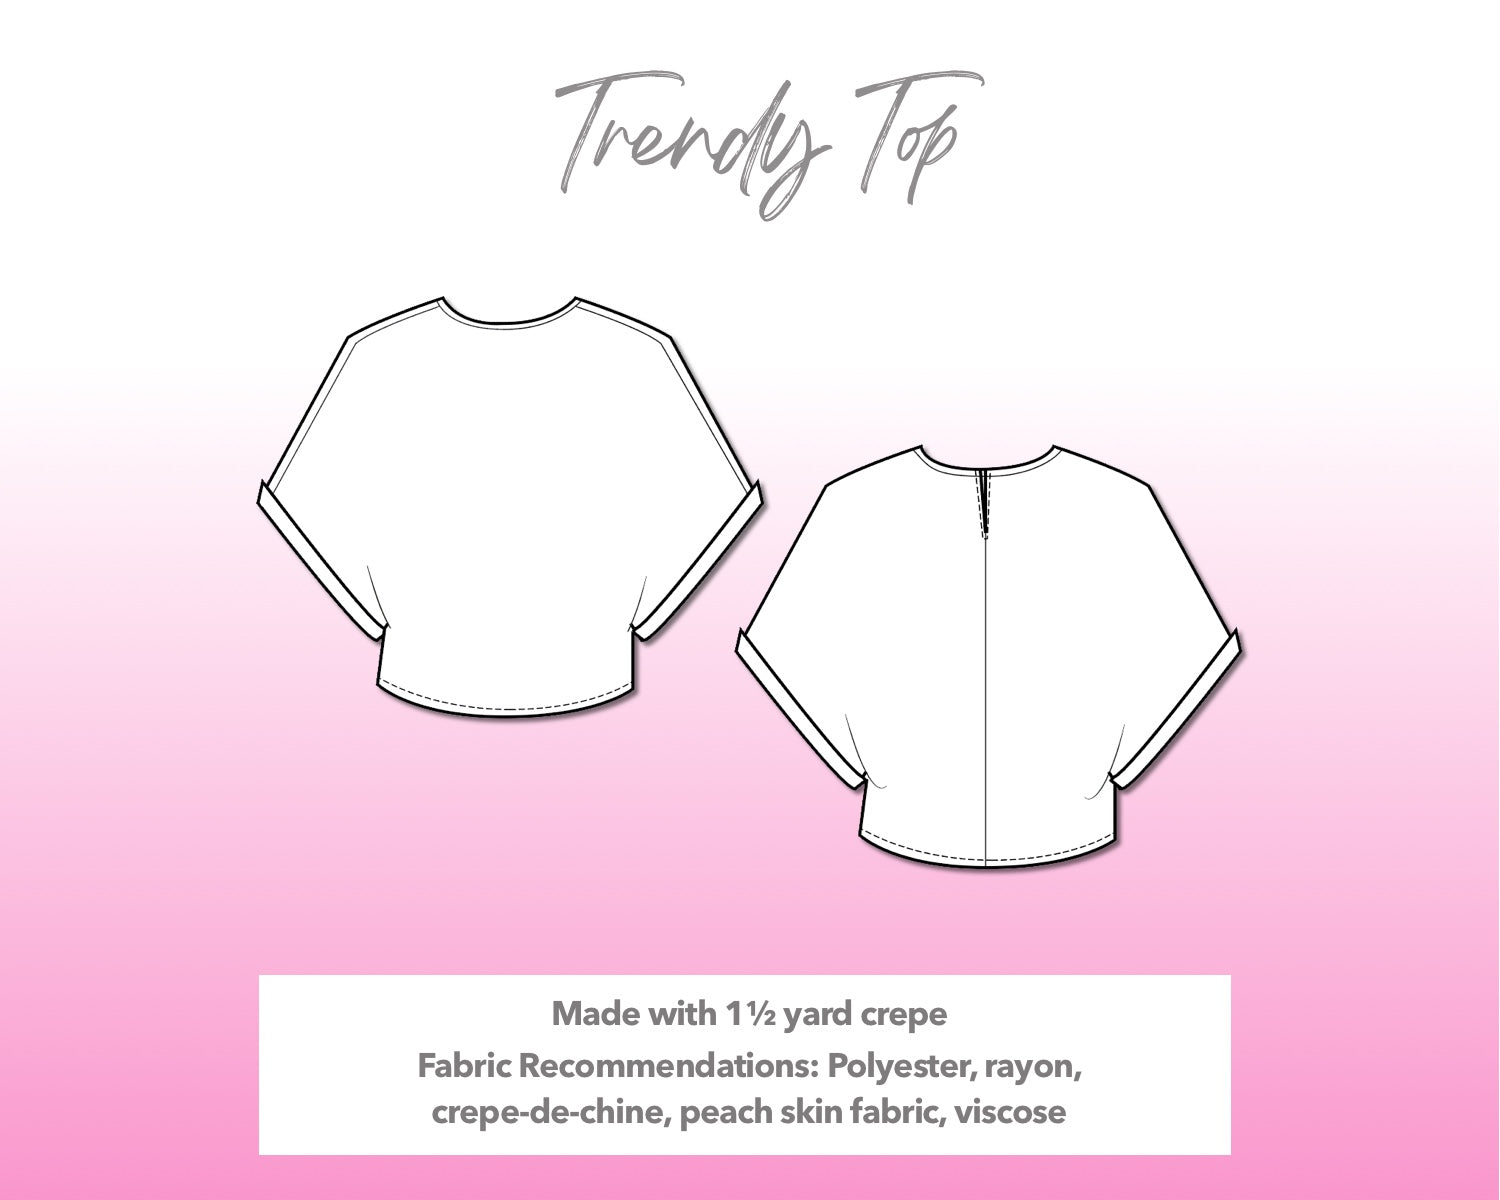 Illustration and detailed description for Trendy Top sewing pattern.